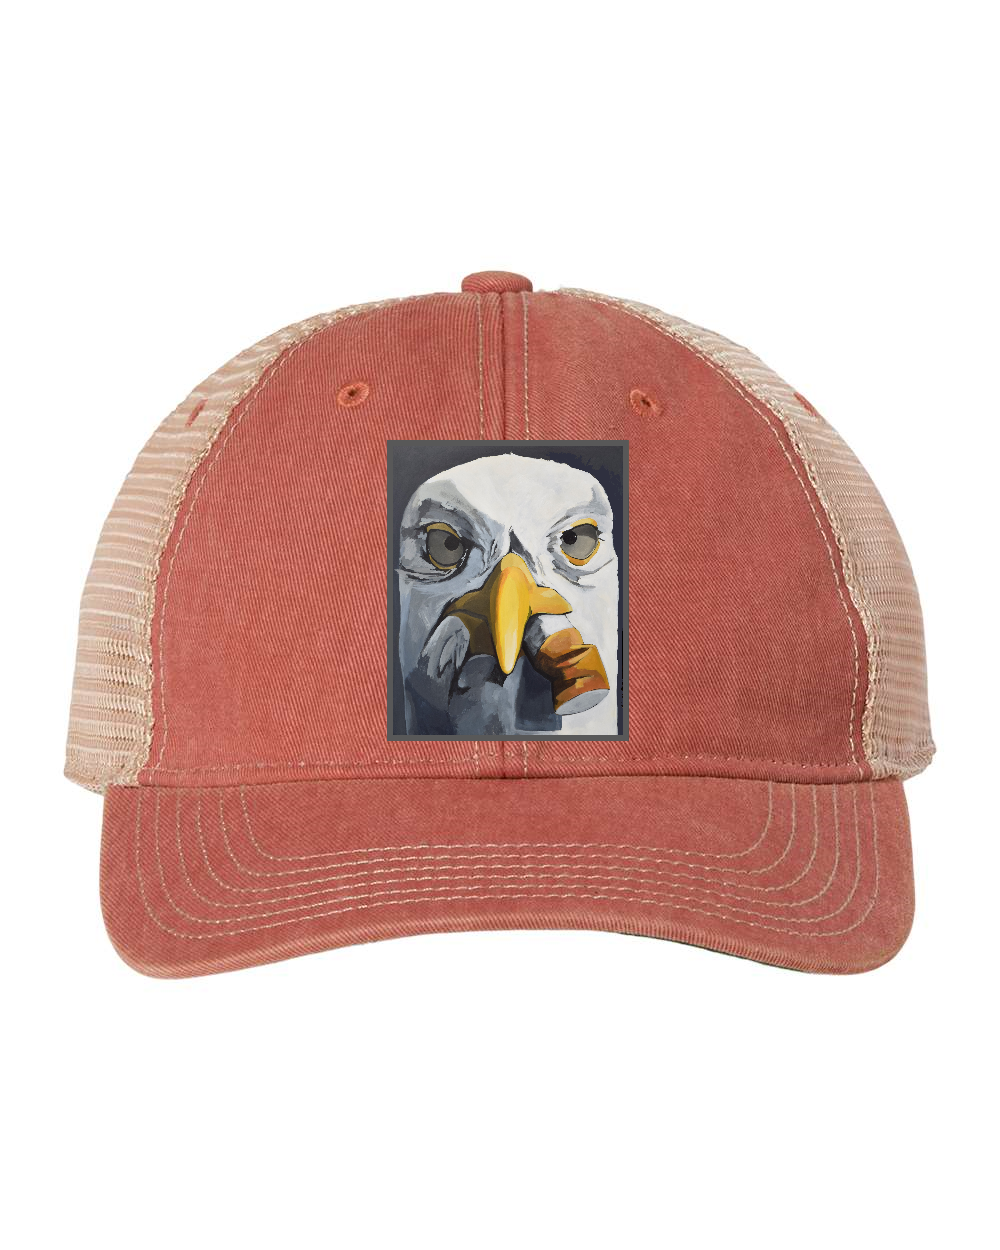 Nantucket Red Unstructured Hats Flyn Costello   